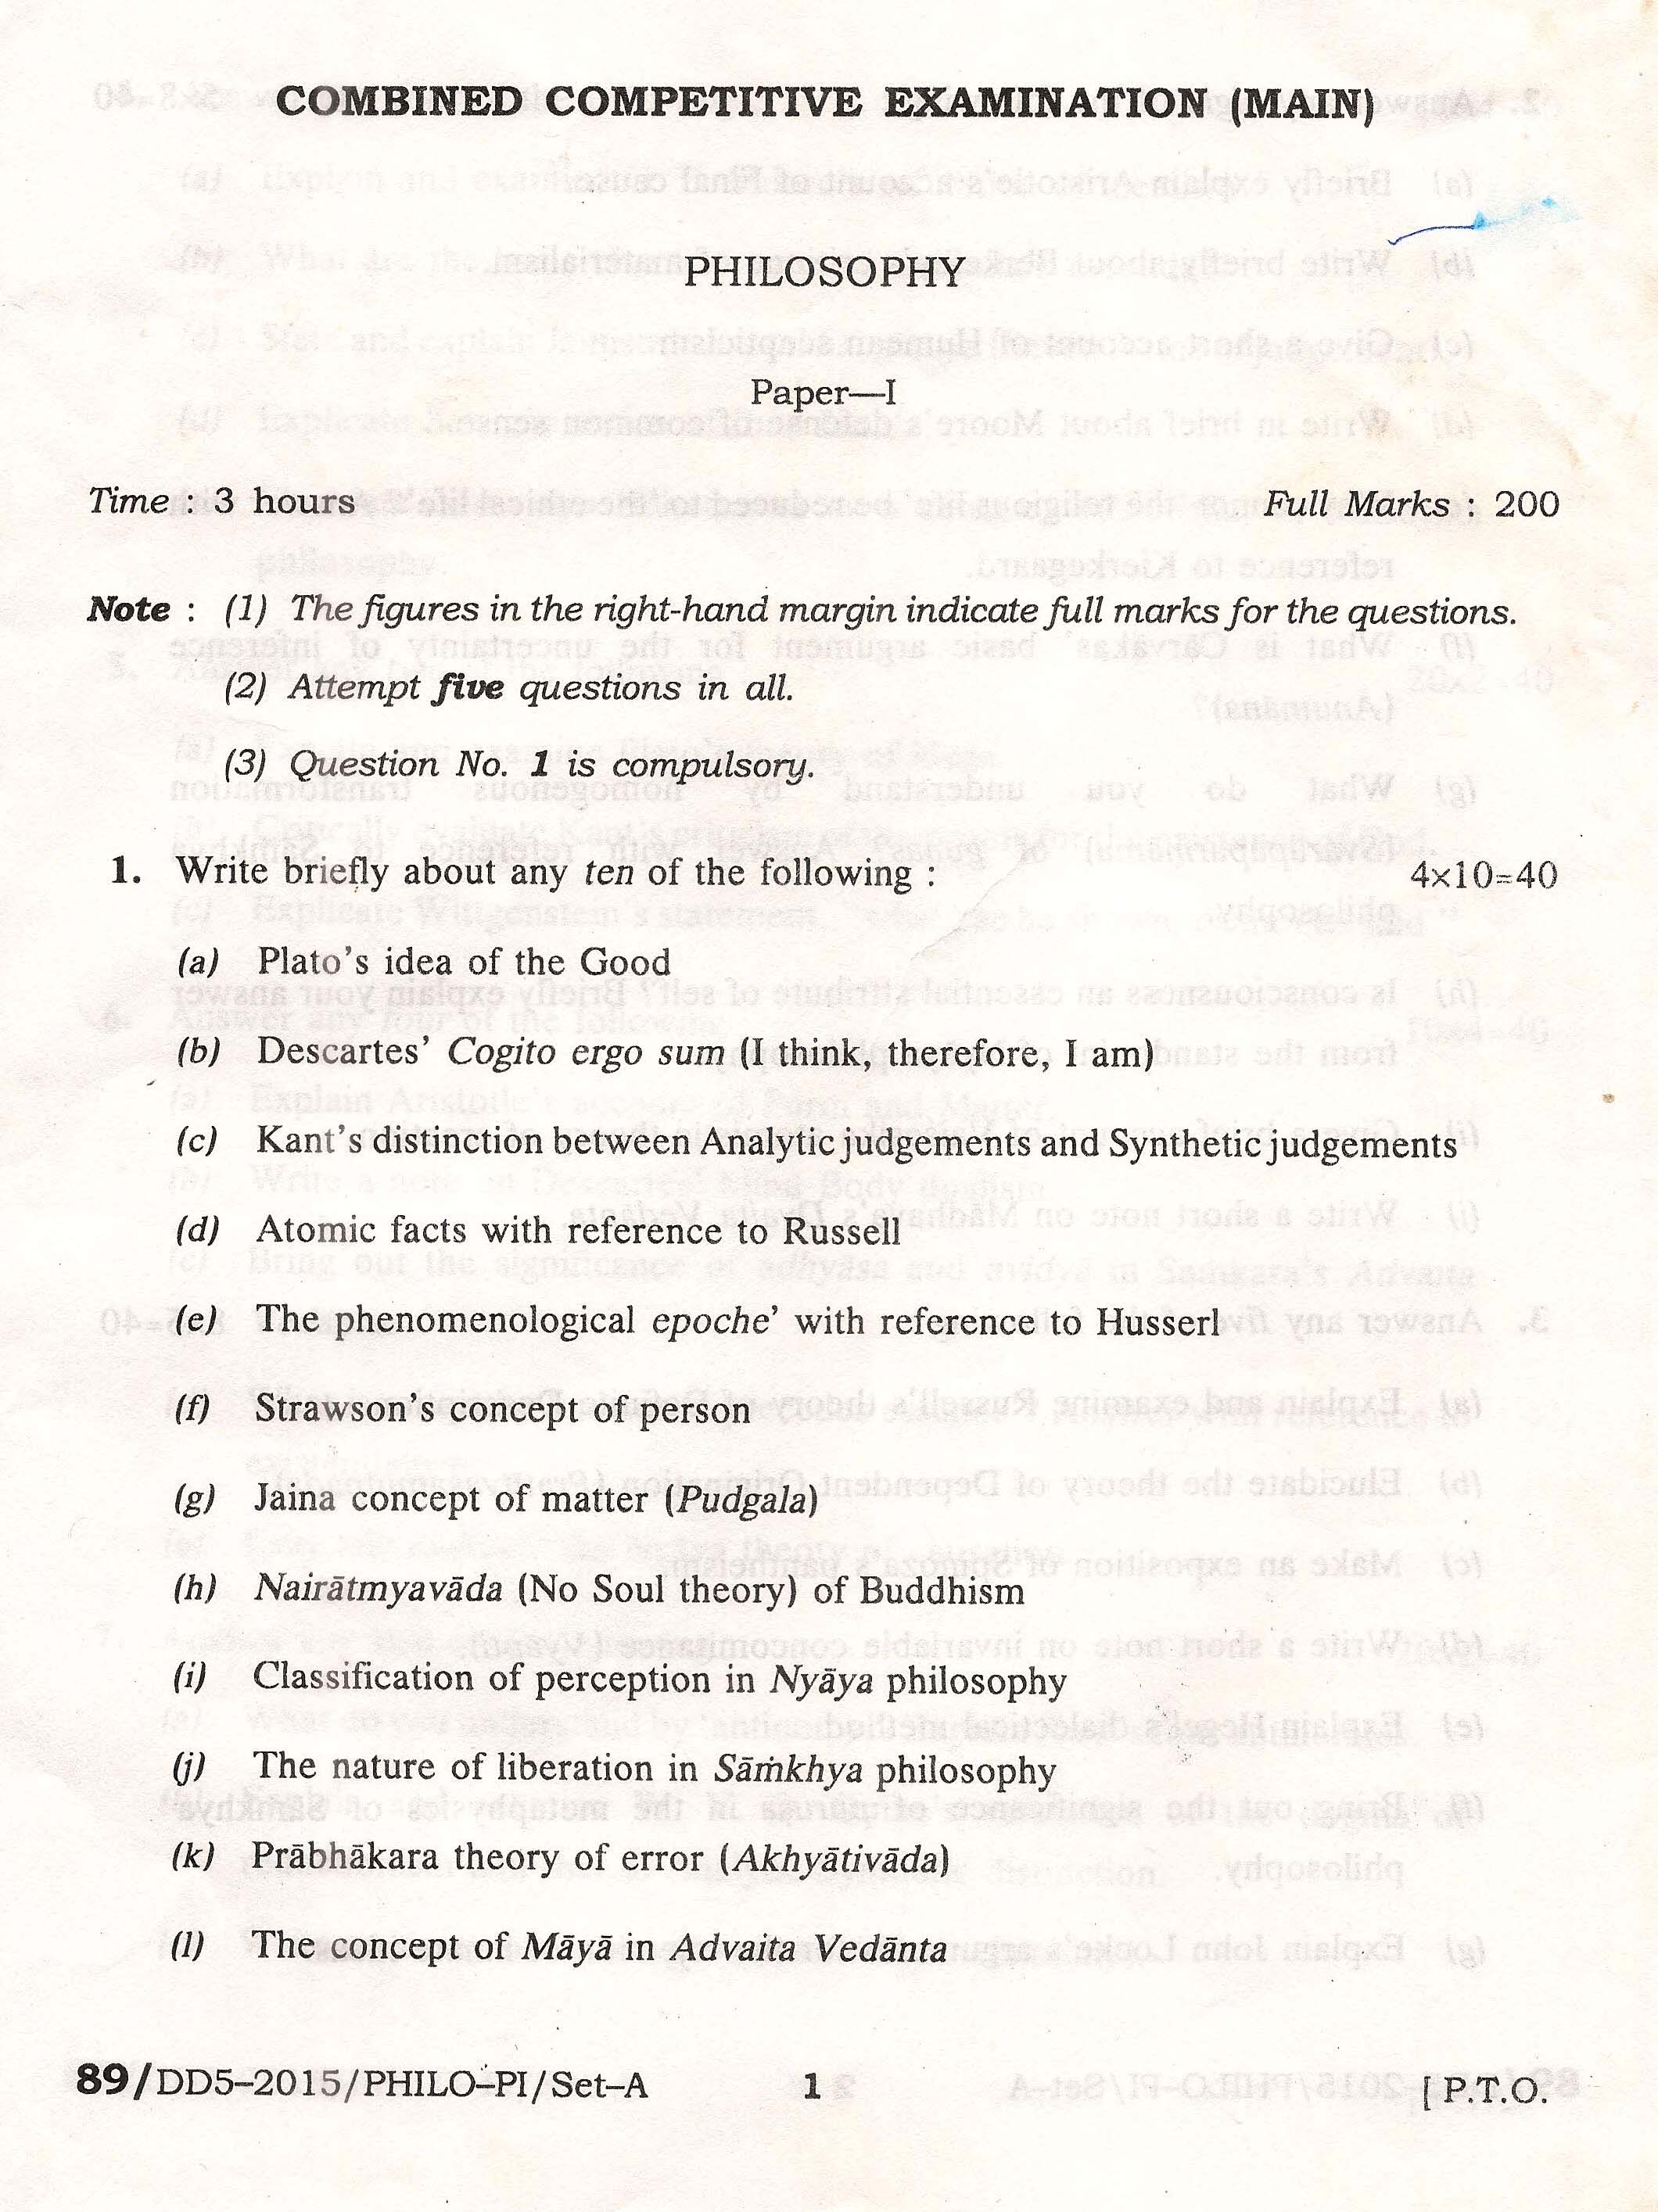 APPSC Combined Competitive Main Exam 2015 Philosophy Paper I 1